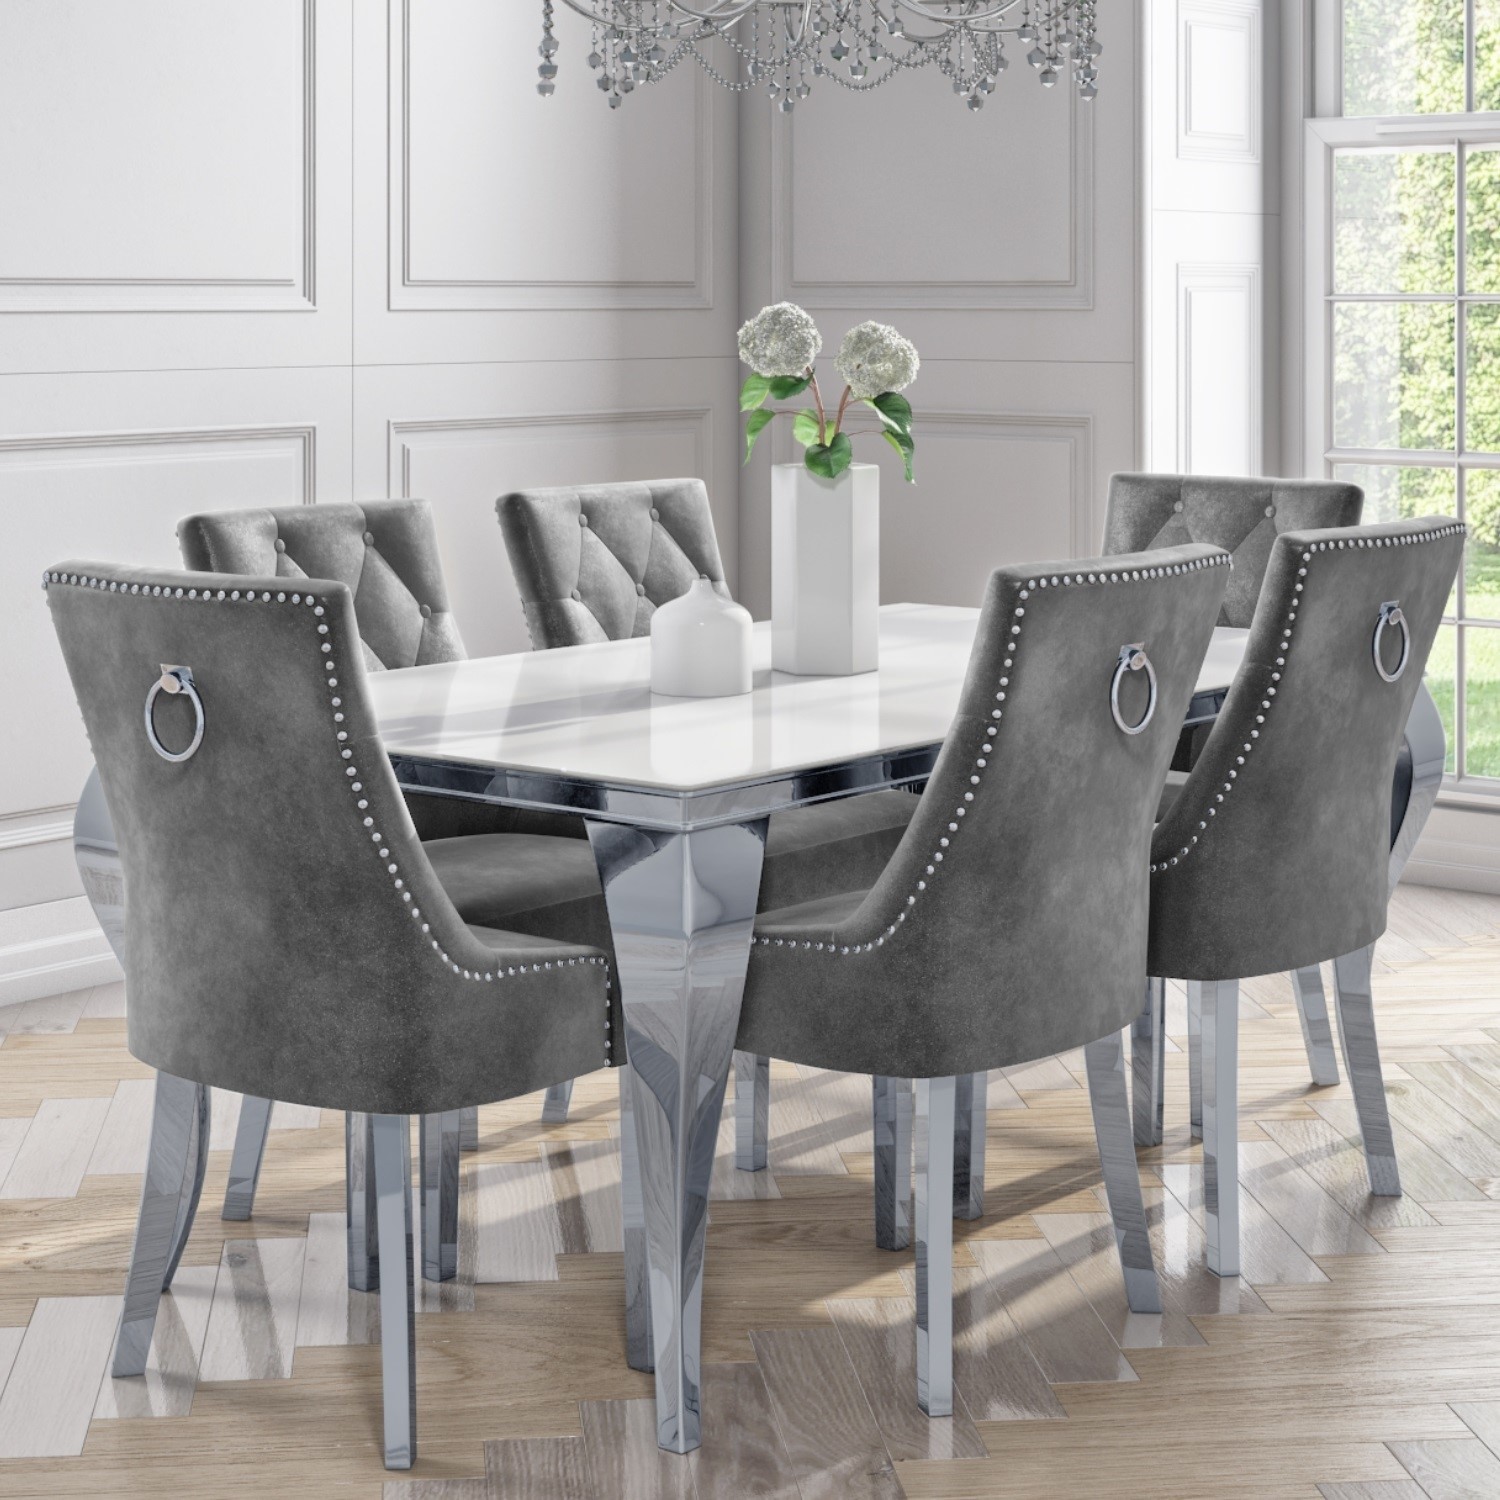 White And Mirrored Dining Table With 6, How Big A Round Table To Seat 6